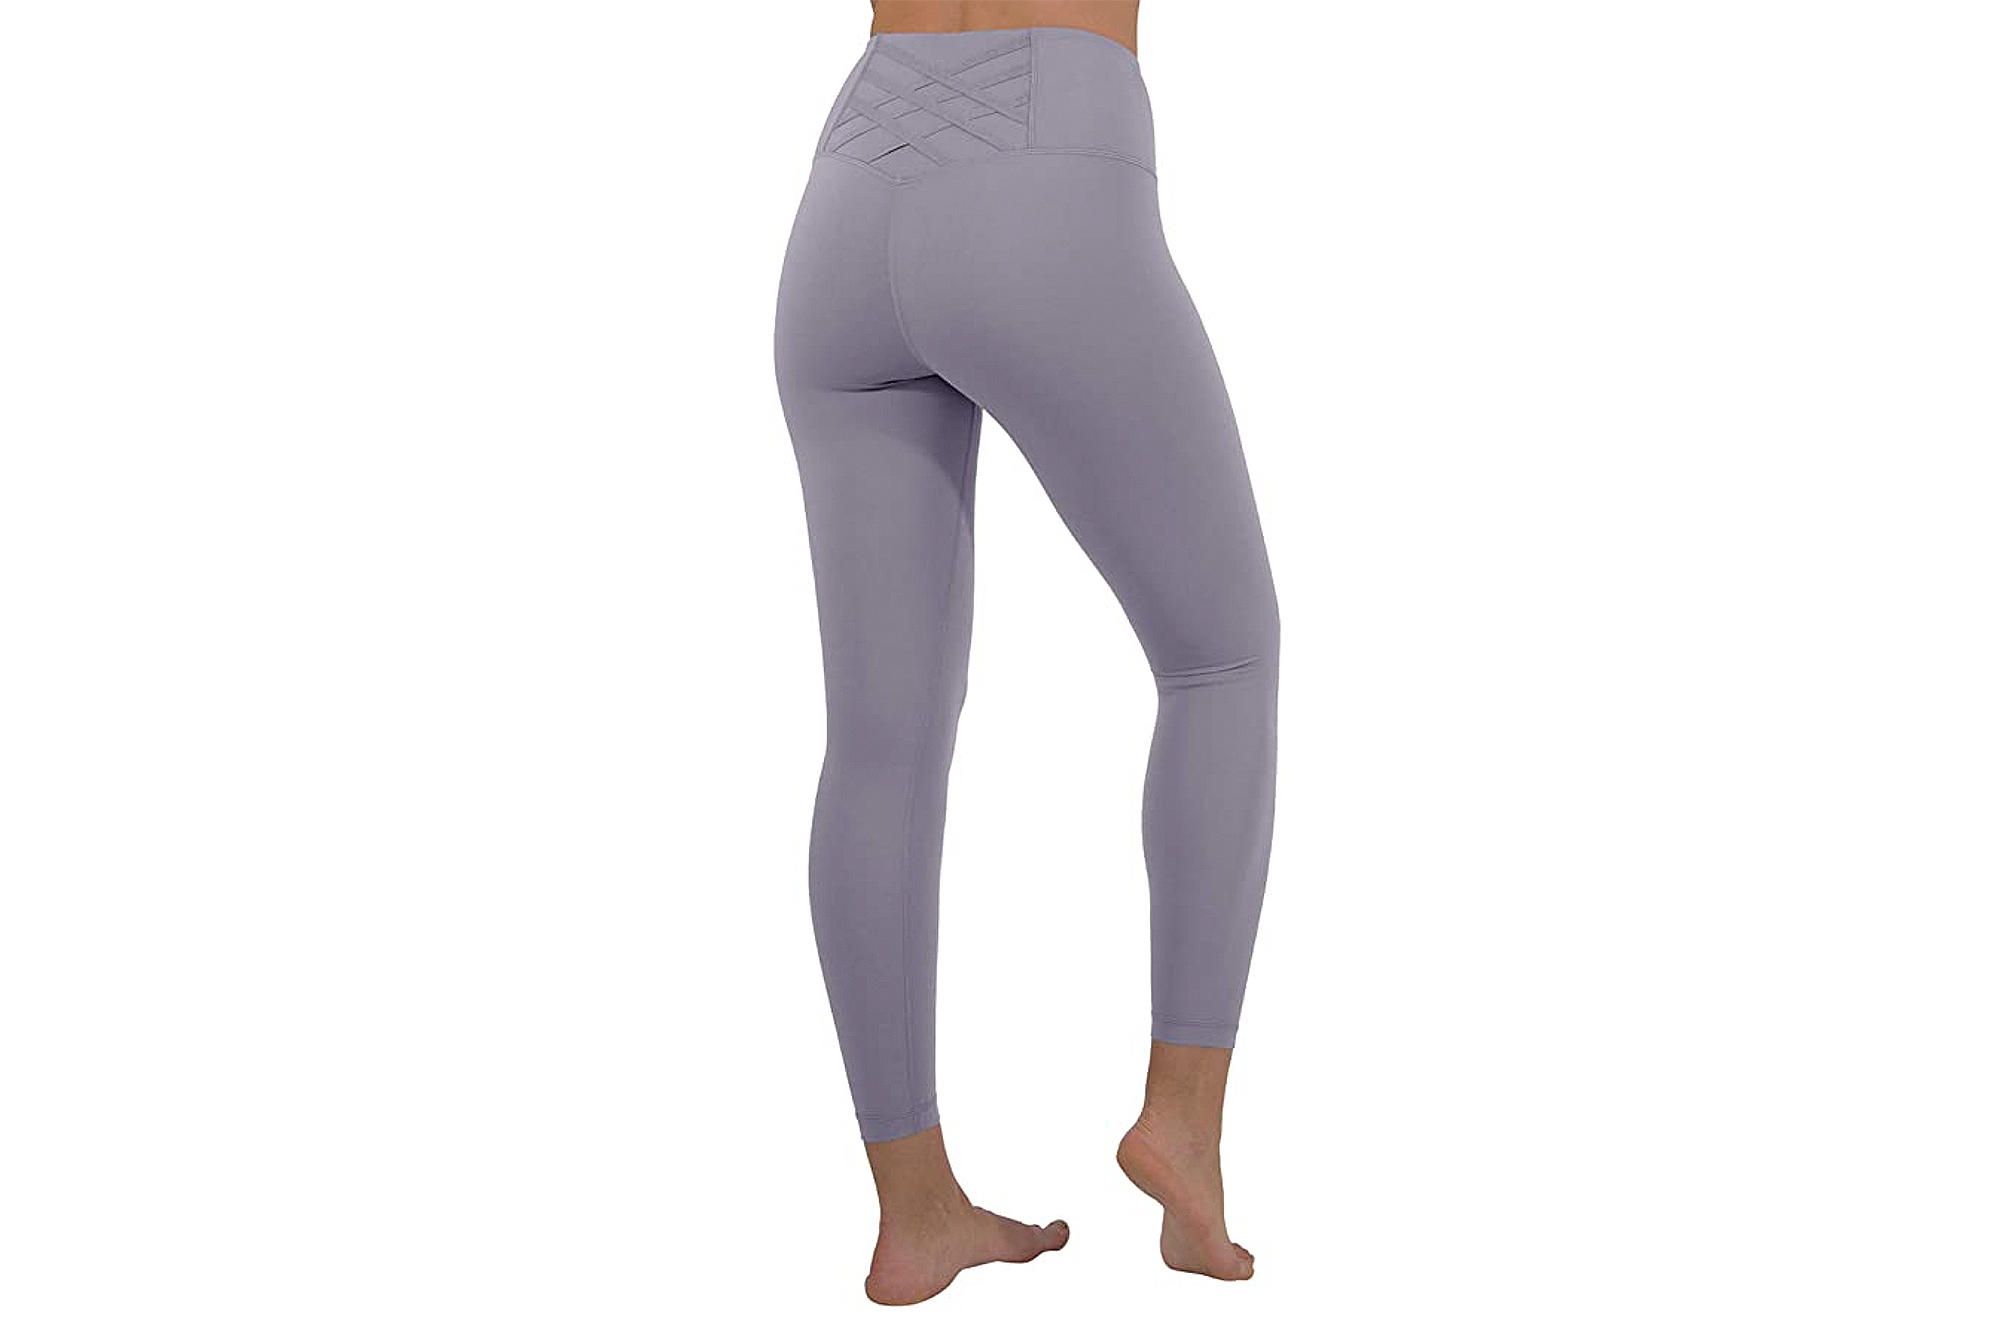 Yogalicious Leggings Have the Most Flattering Criss-Cross Design